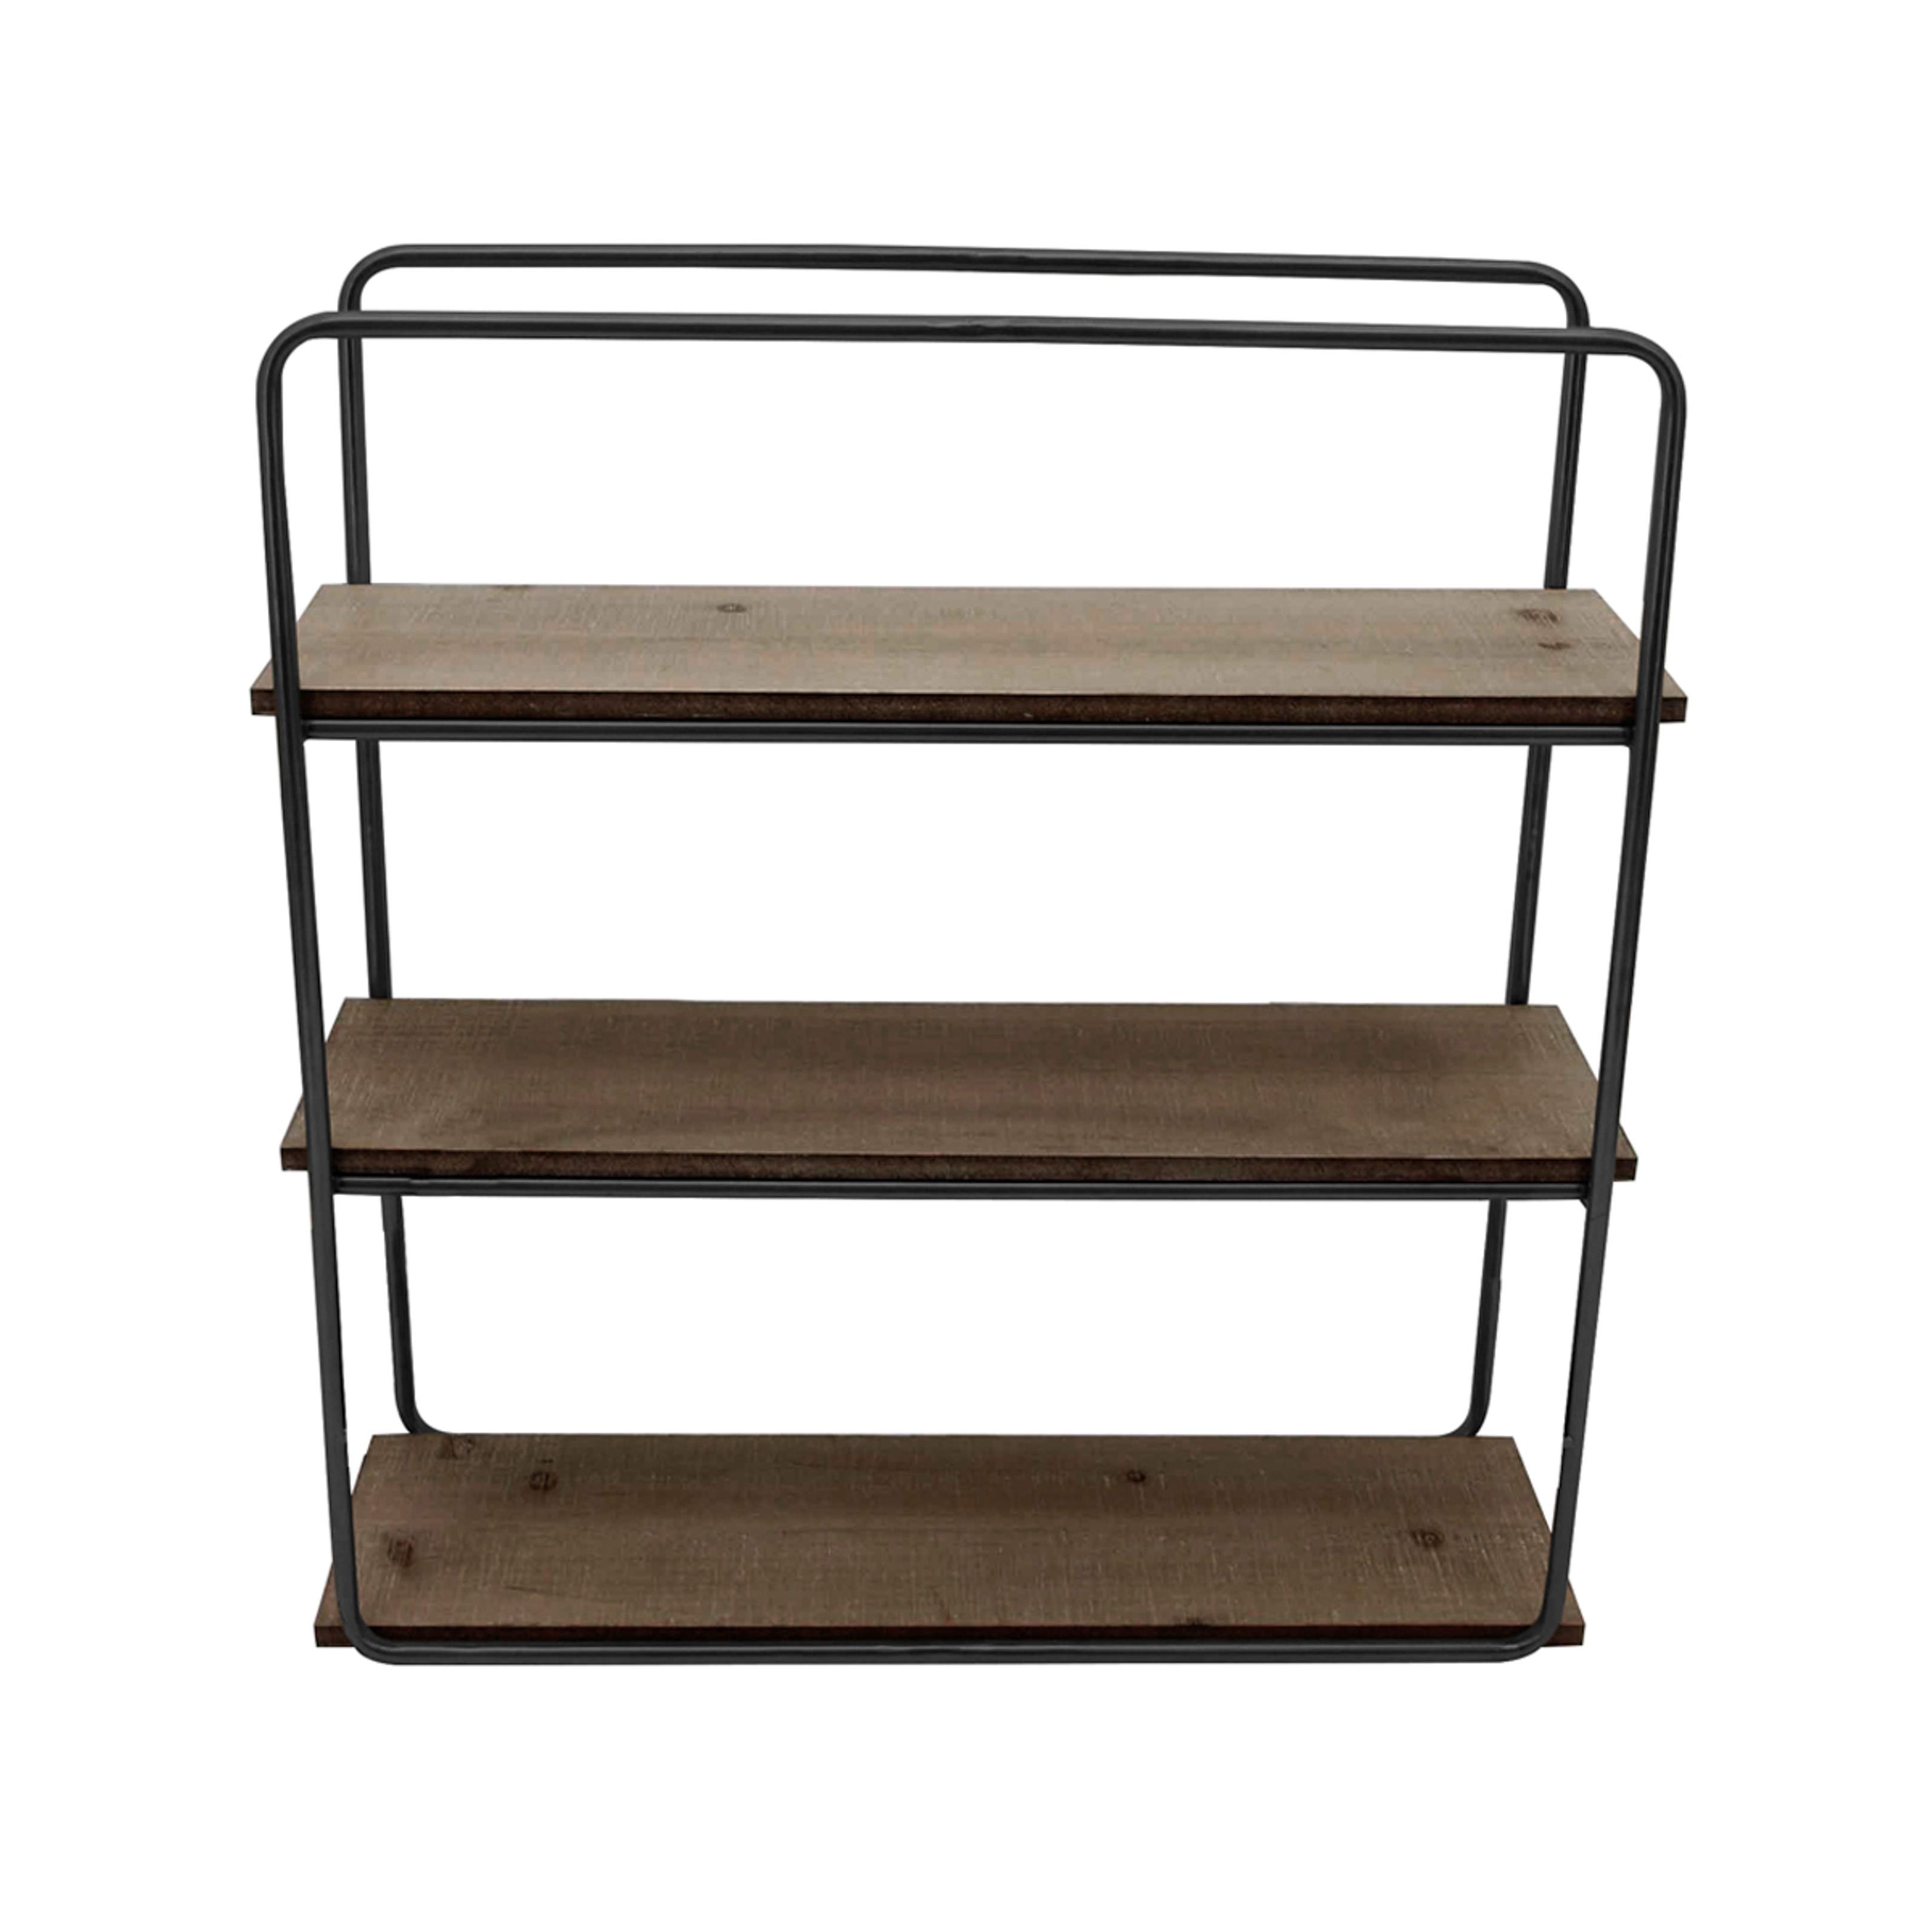 3-Tier Wall Shelf Contemporary Rustic Industrial Black and Brown Decorative Shelf for Mounted Bathroom, Bedroom,